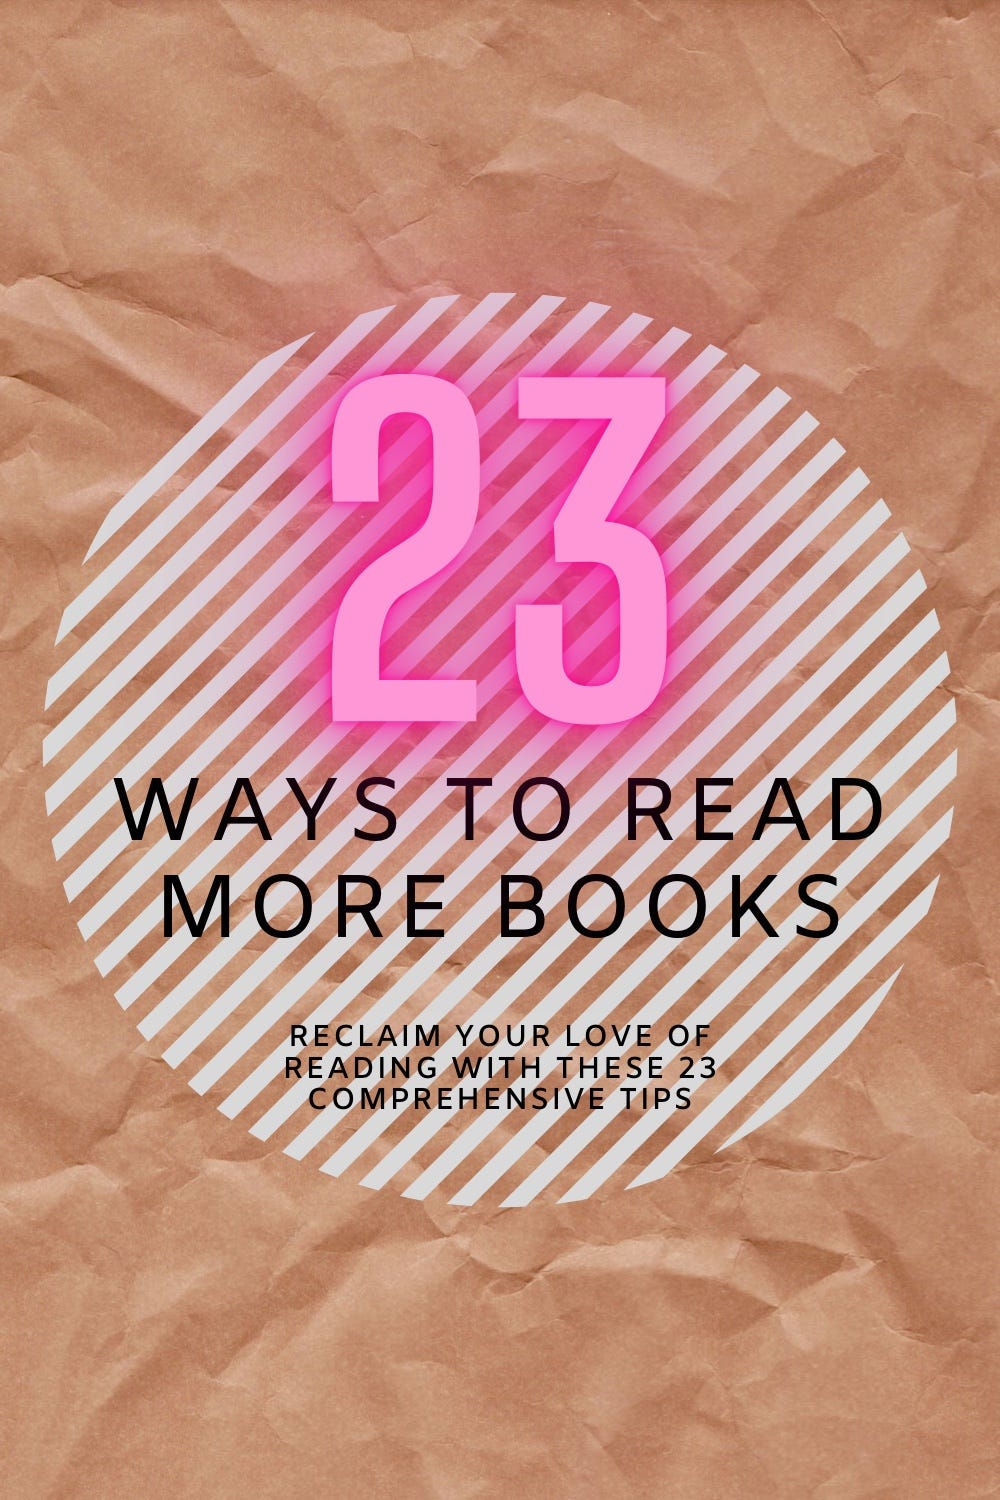 23-ways-to-read-more-books-reclaim-your-love-of-reading-with-these